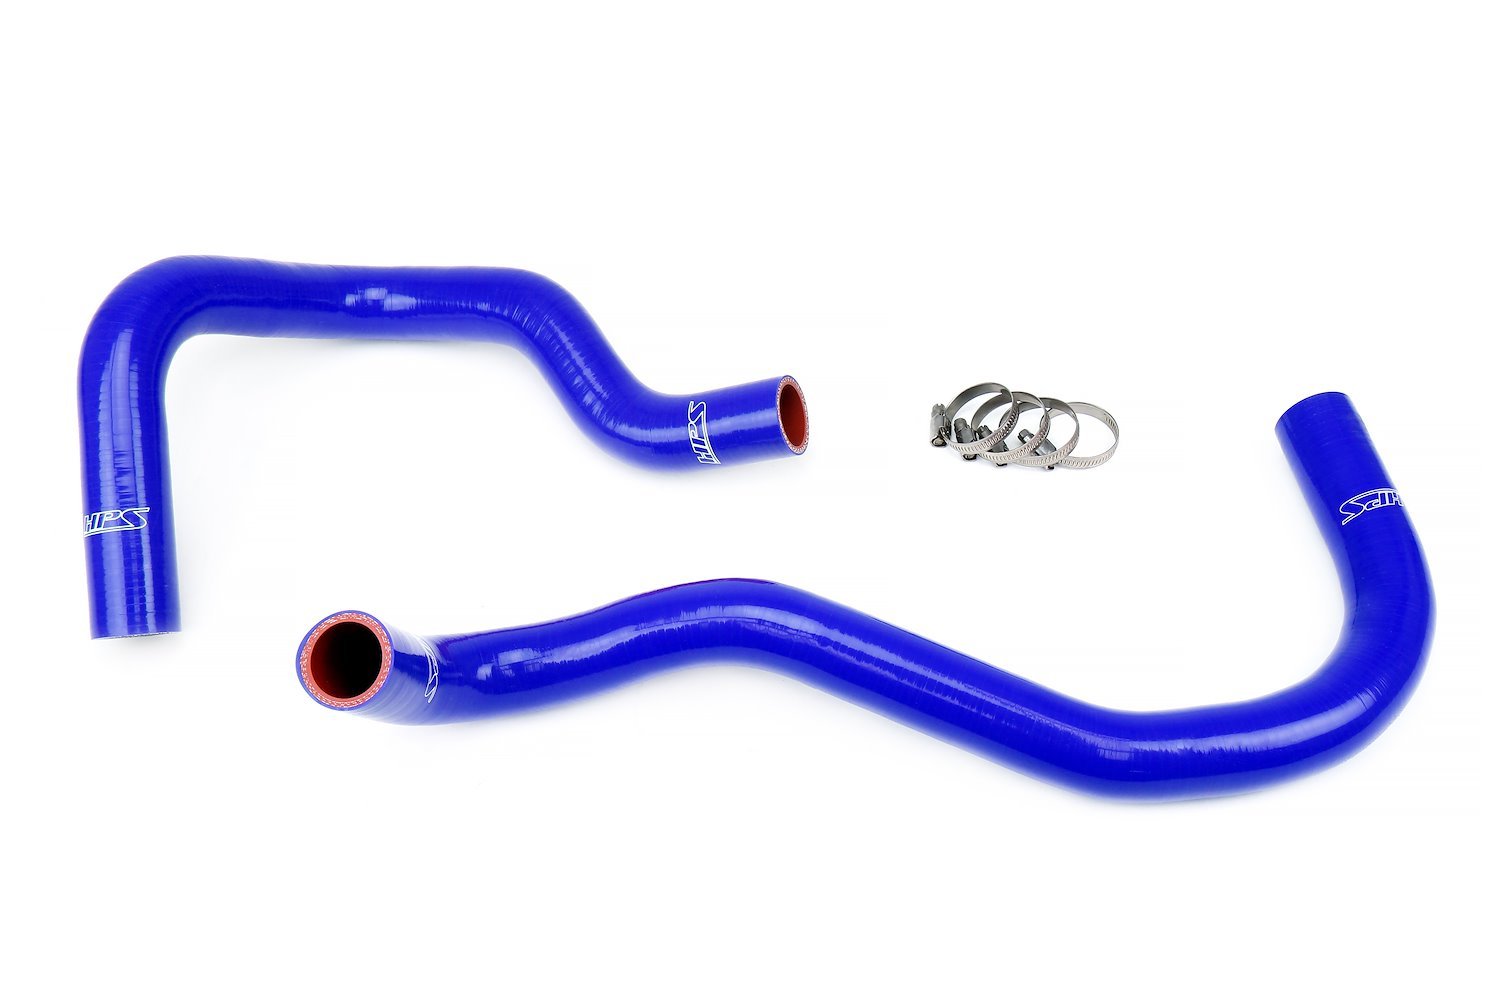 57-1921R-BLUE Radiator Hose Kit, High-Temp 3-Ply Reinforced Silicone, Replaces OEM Rubber Radiator Hoses